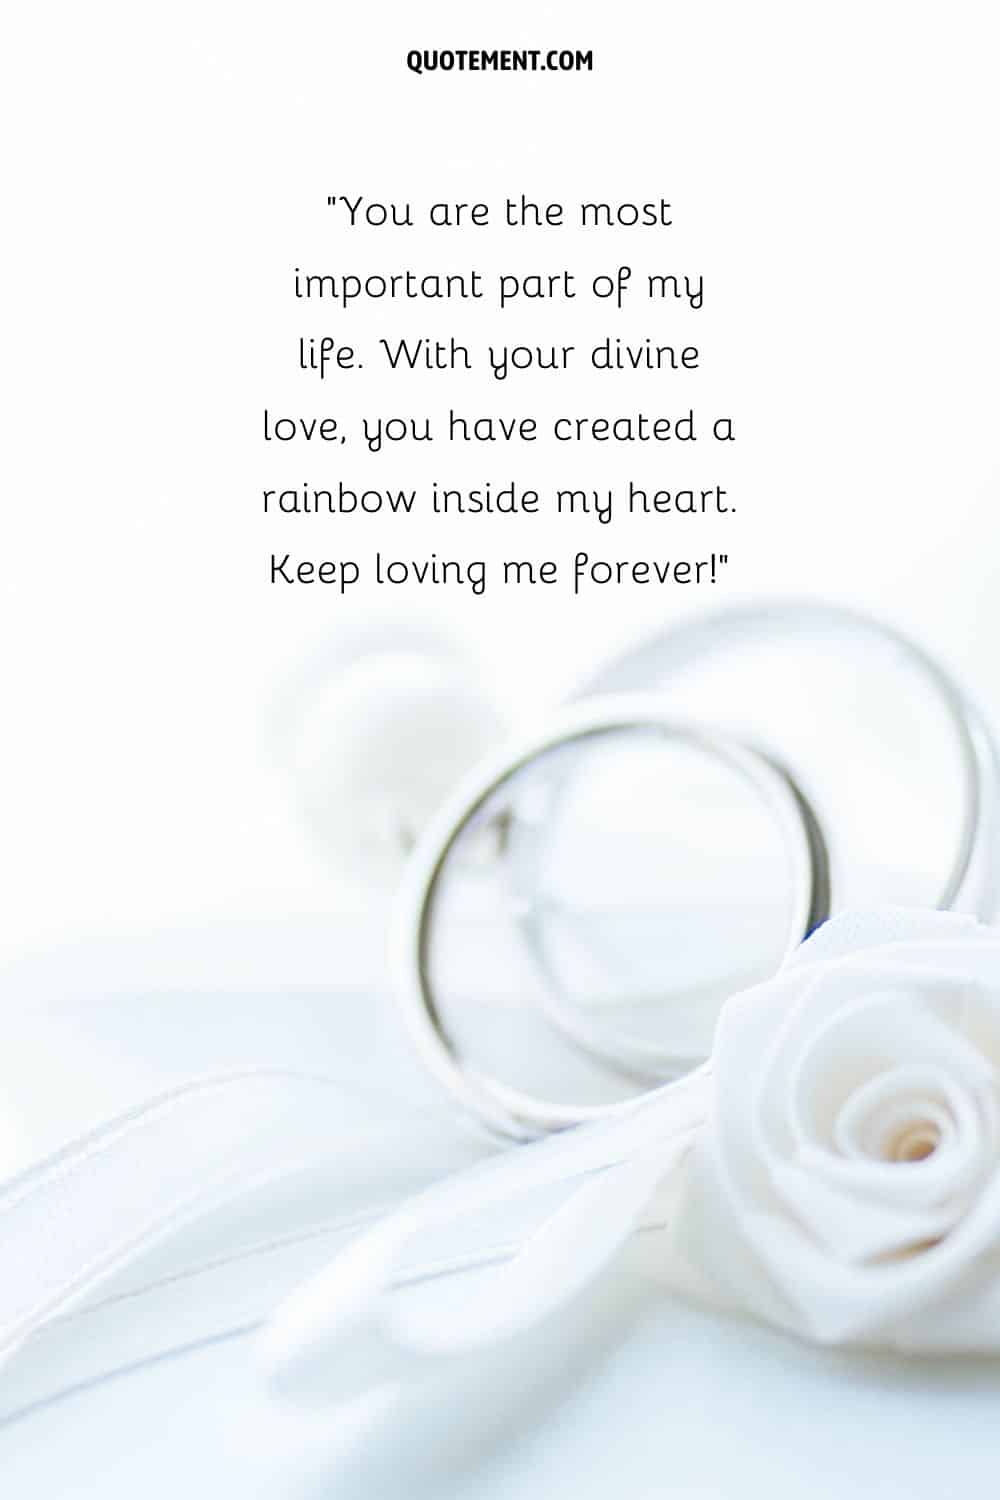 white rose and wedding rings representing heart touching wedding anniversary quote for your wife